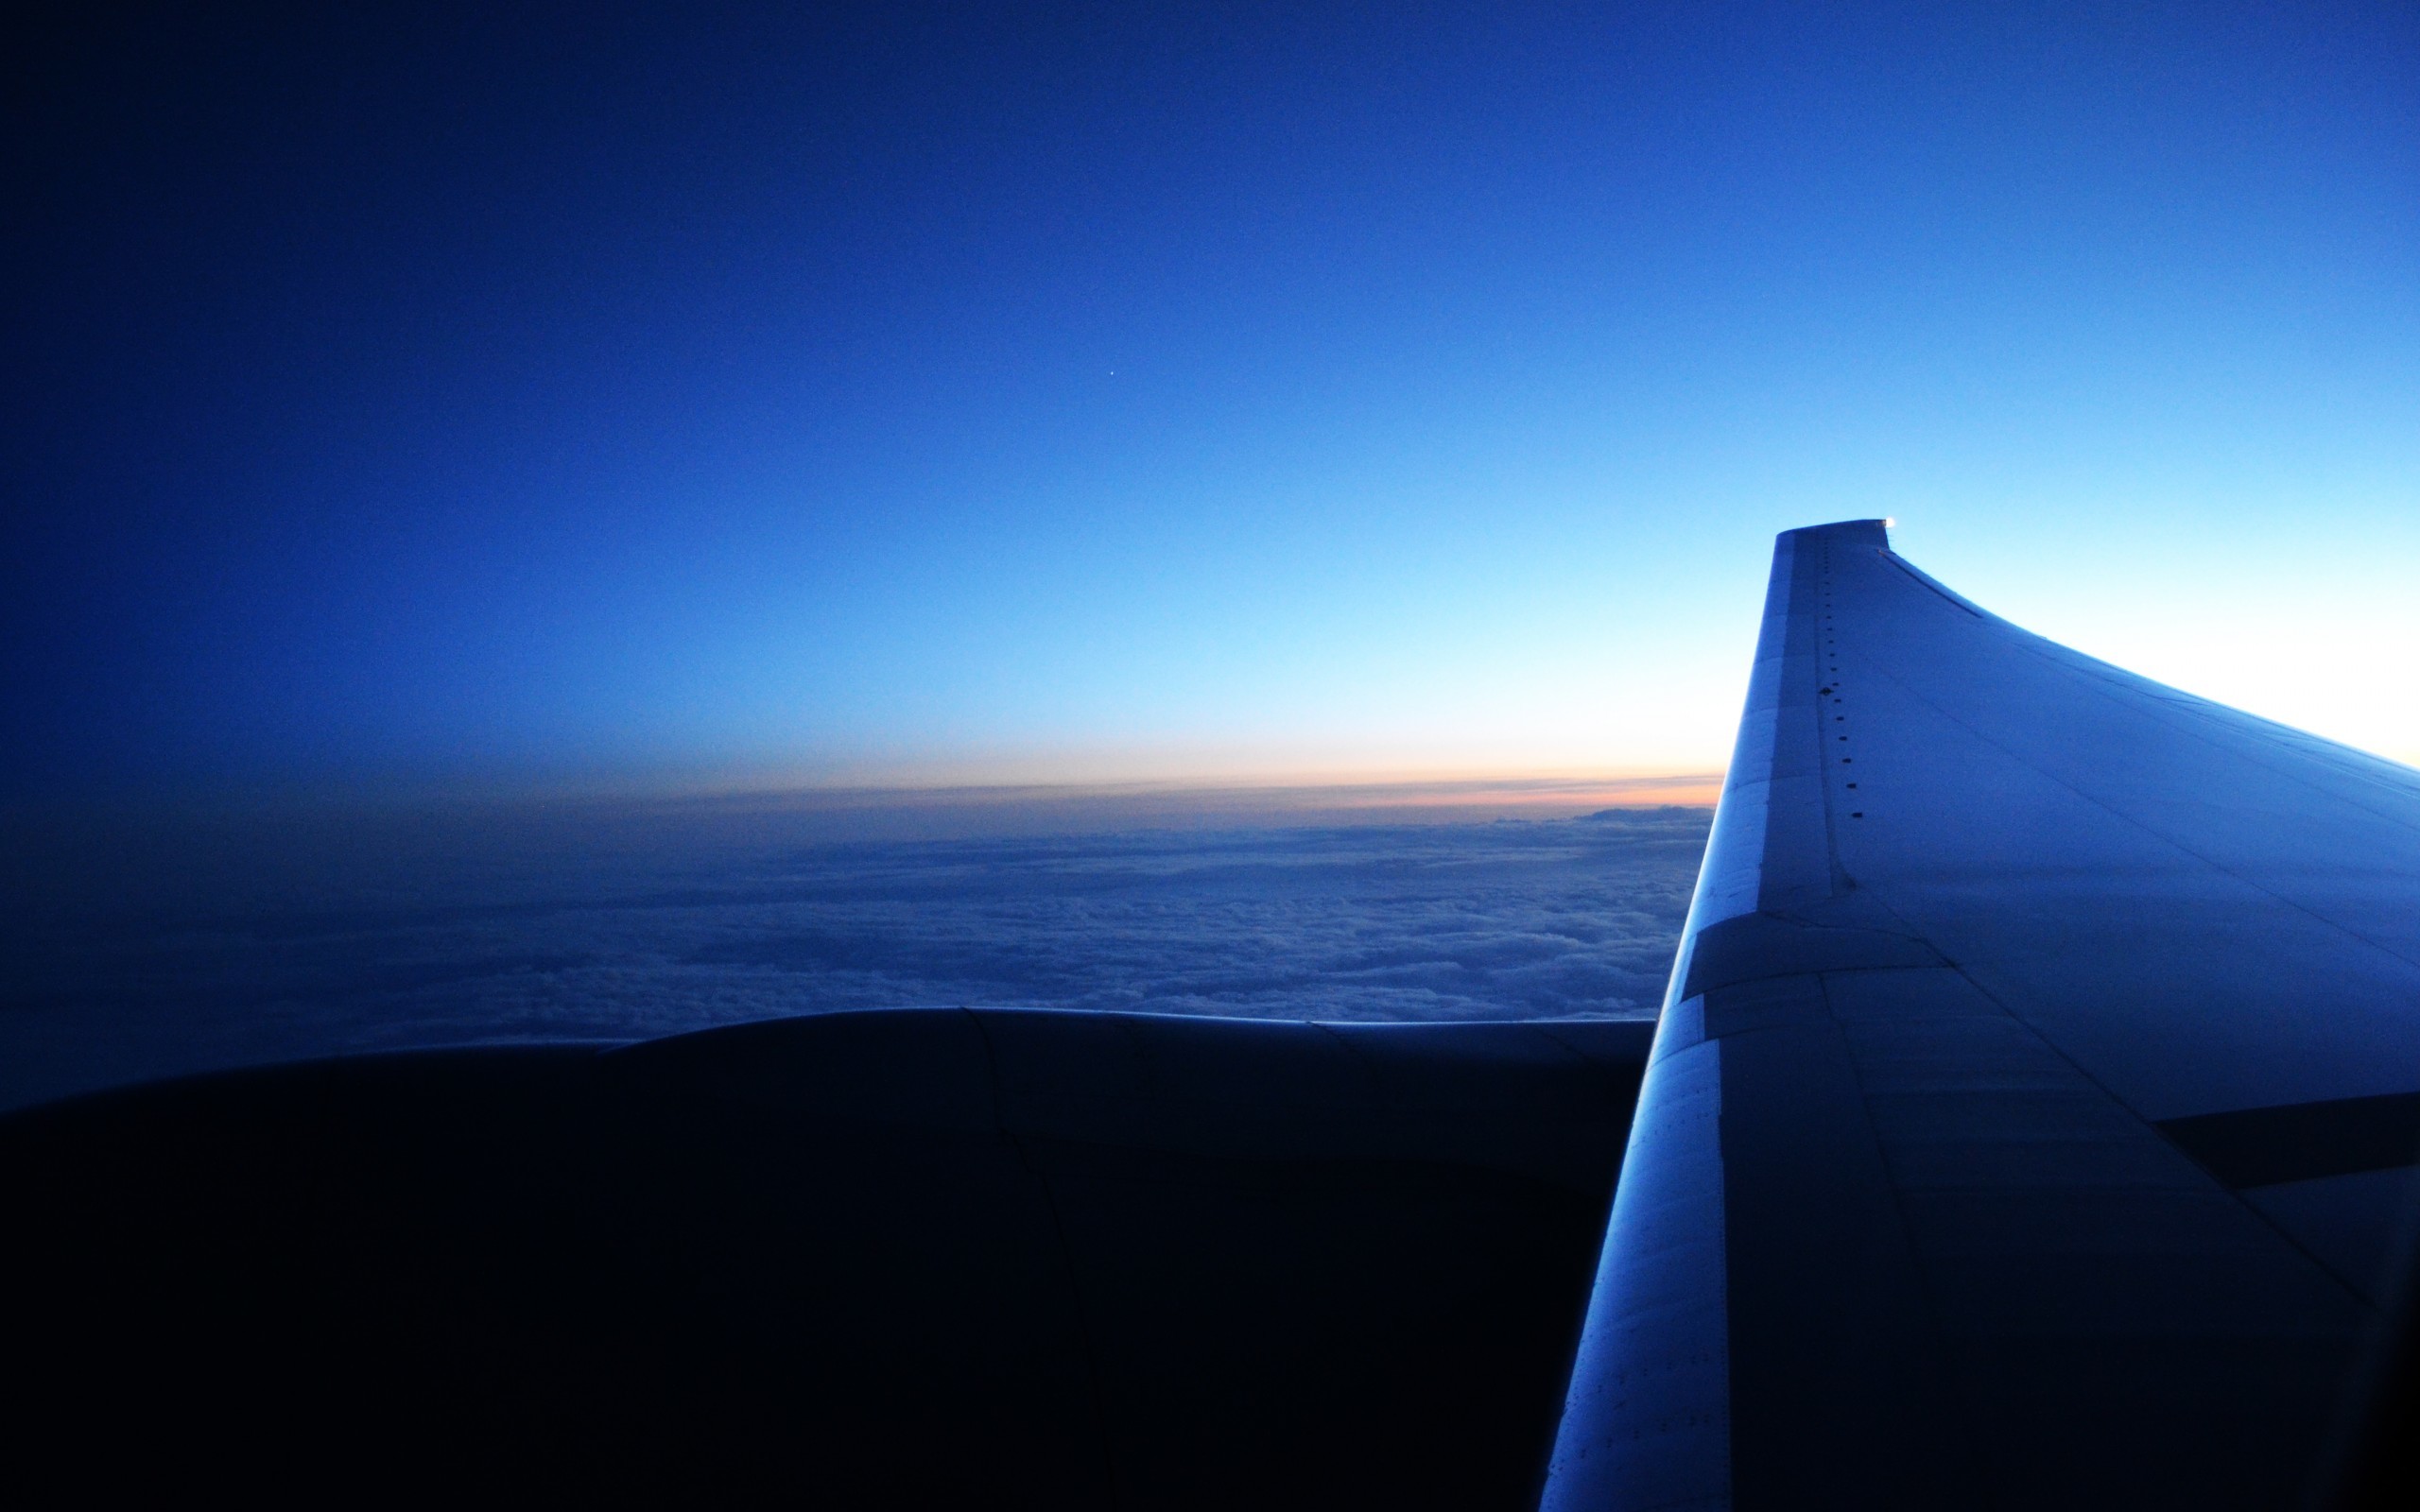 2560x1600 ... boeing 777 wing wallpapers boeing 777 wing stock photos ...